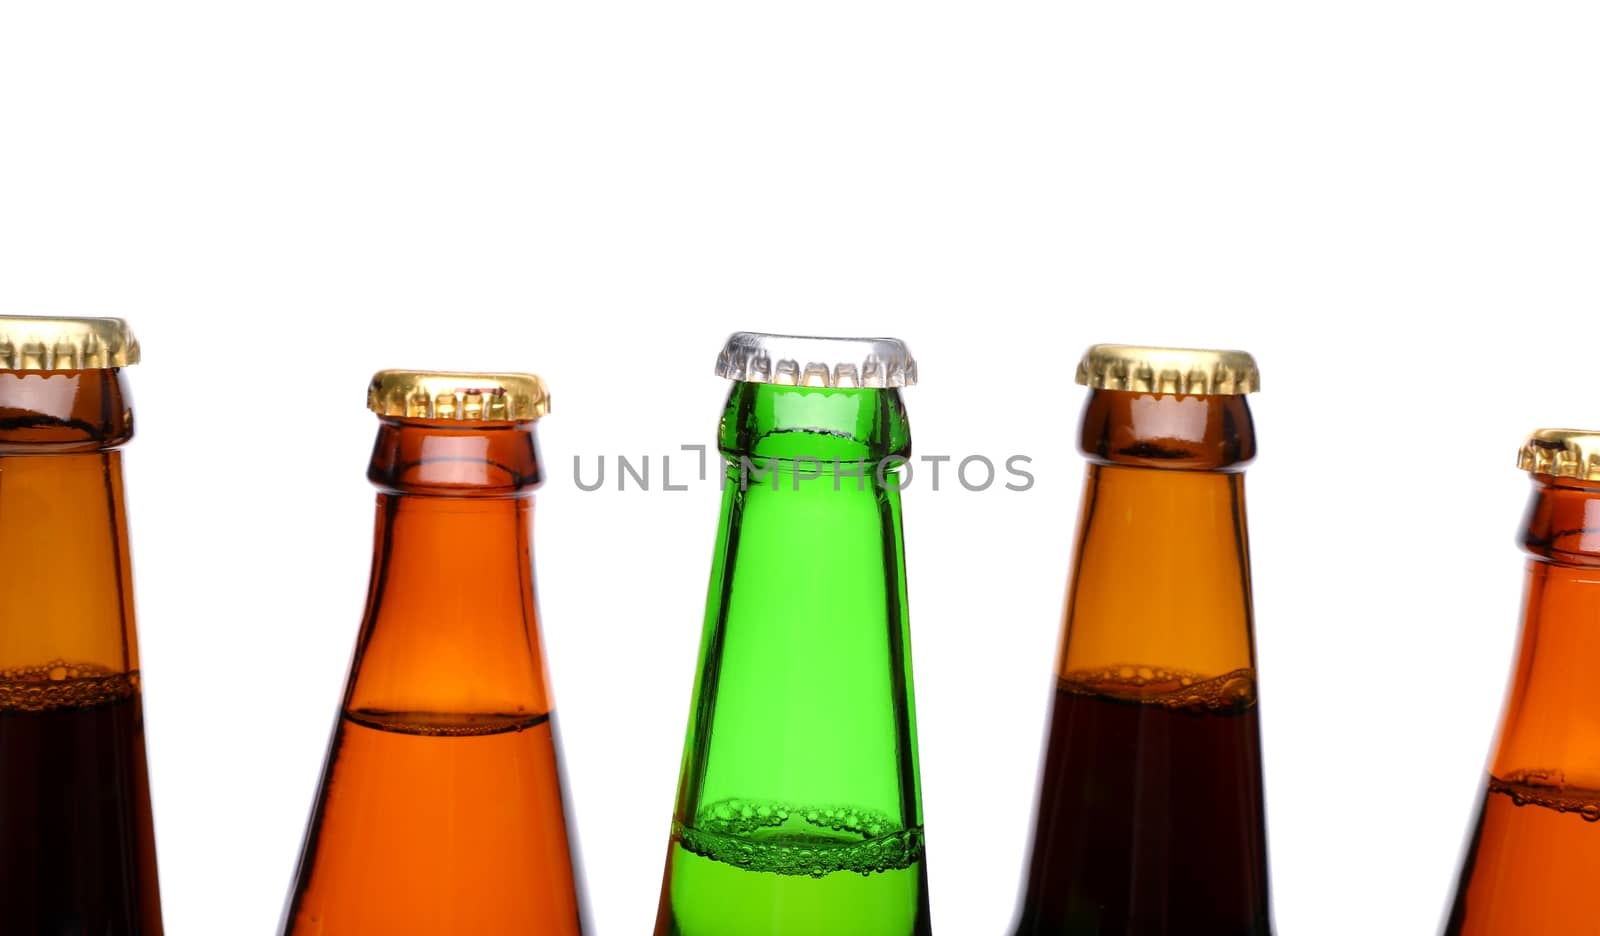 A row of top beer bottlenecks on a white background with a reflection.